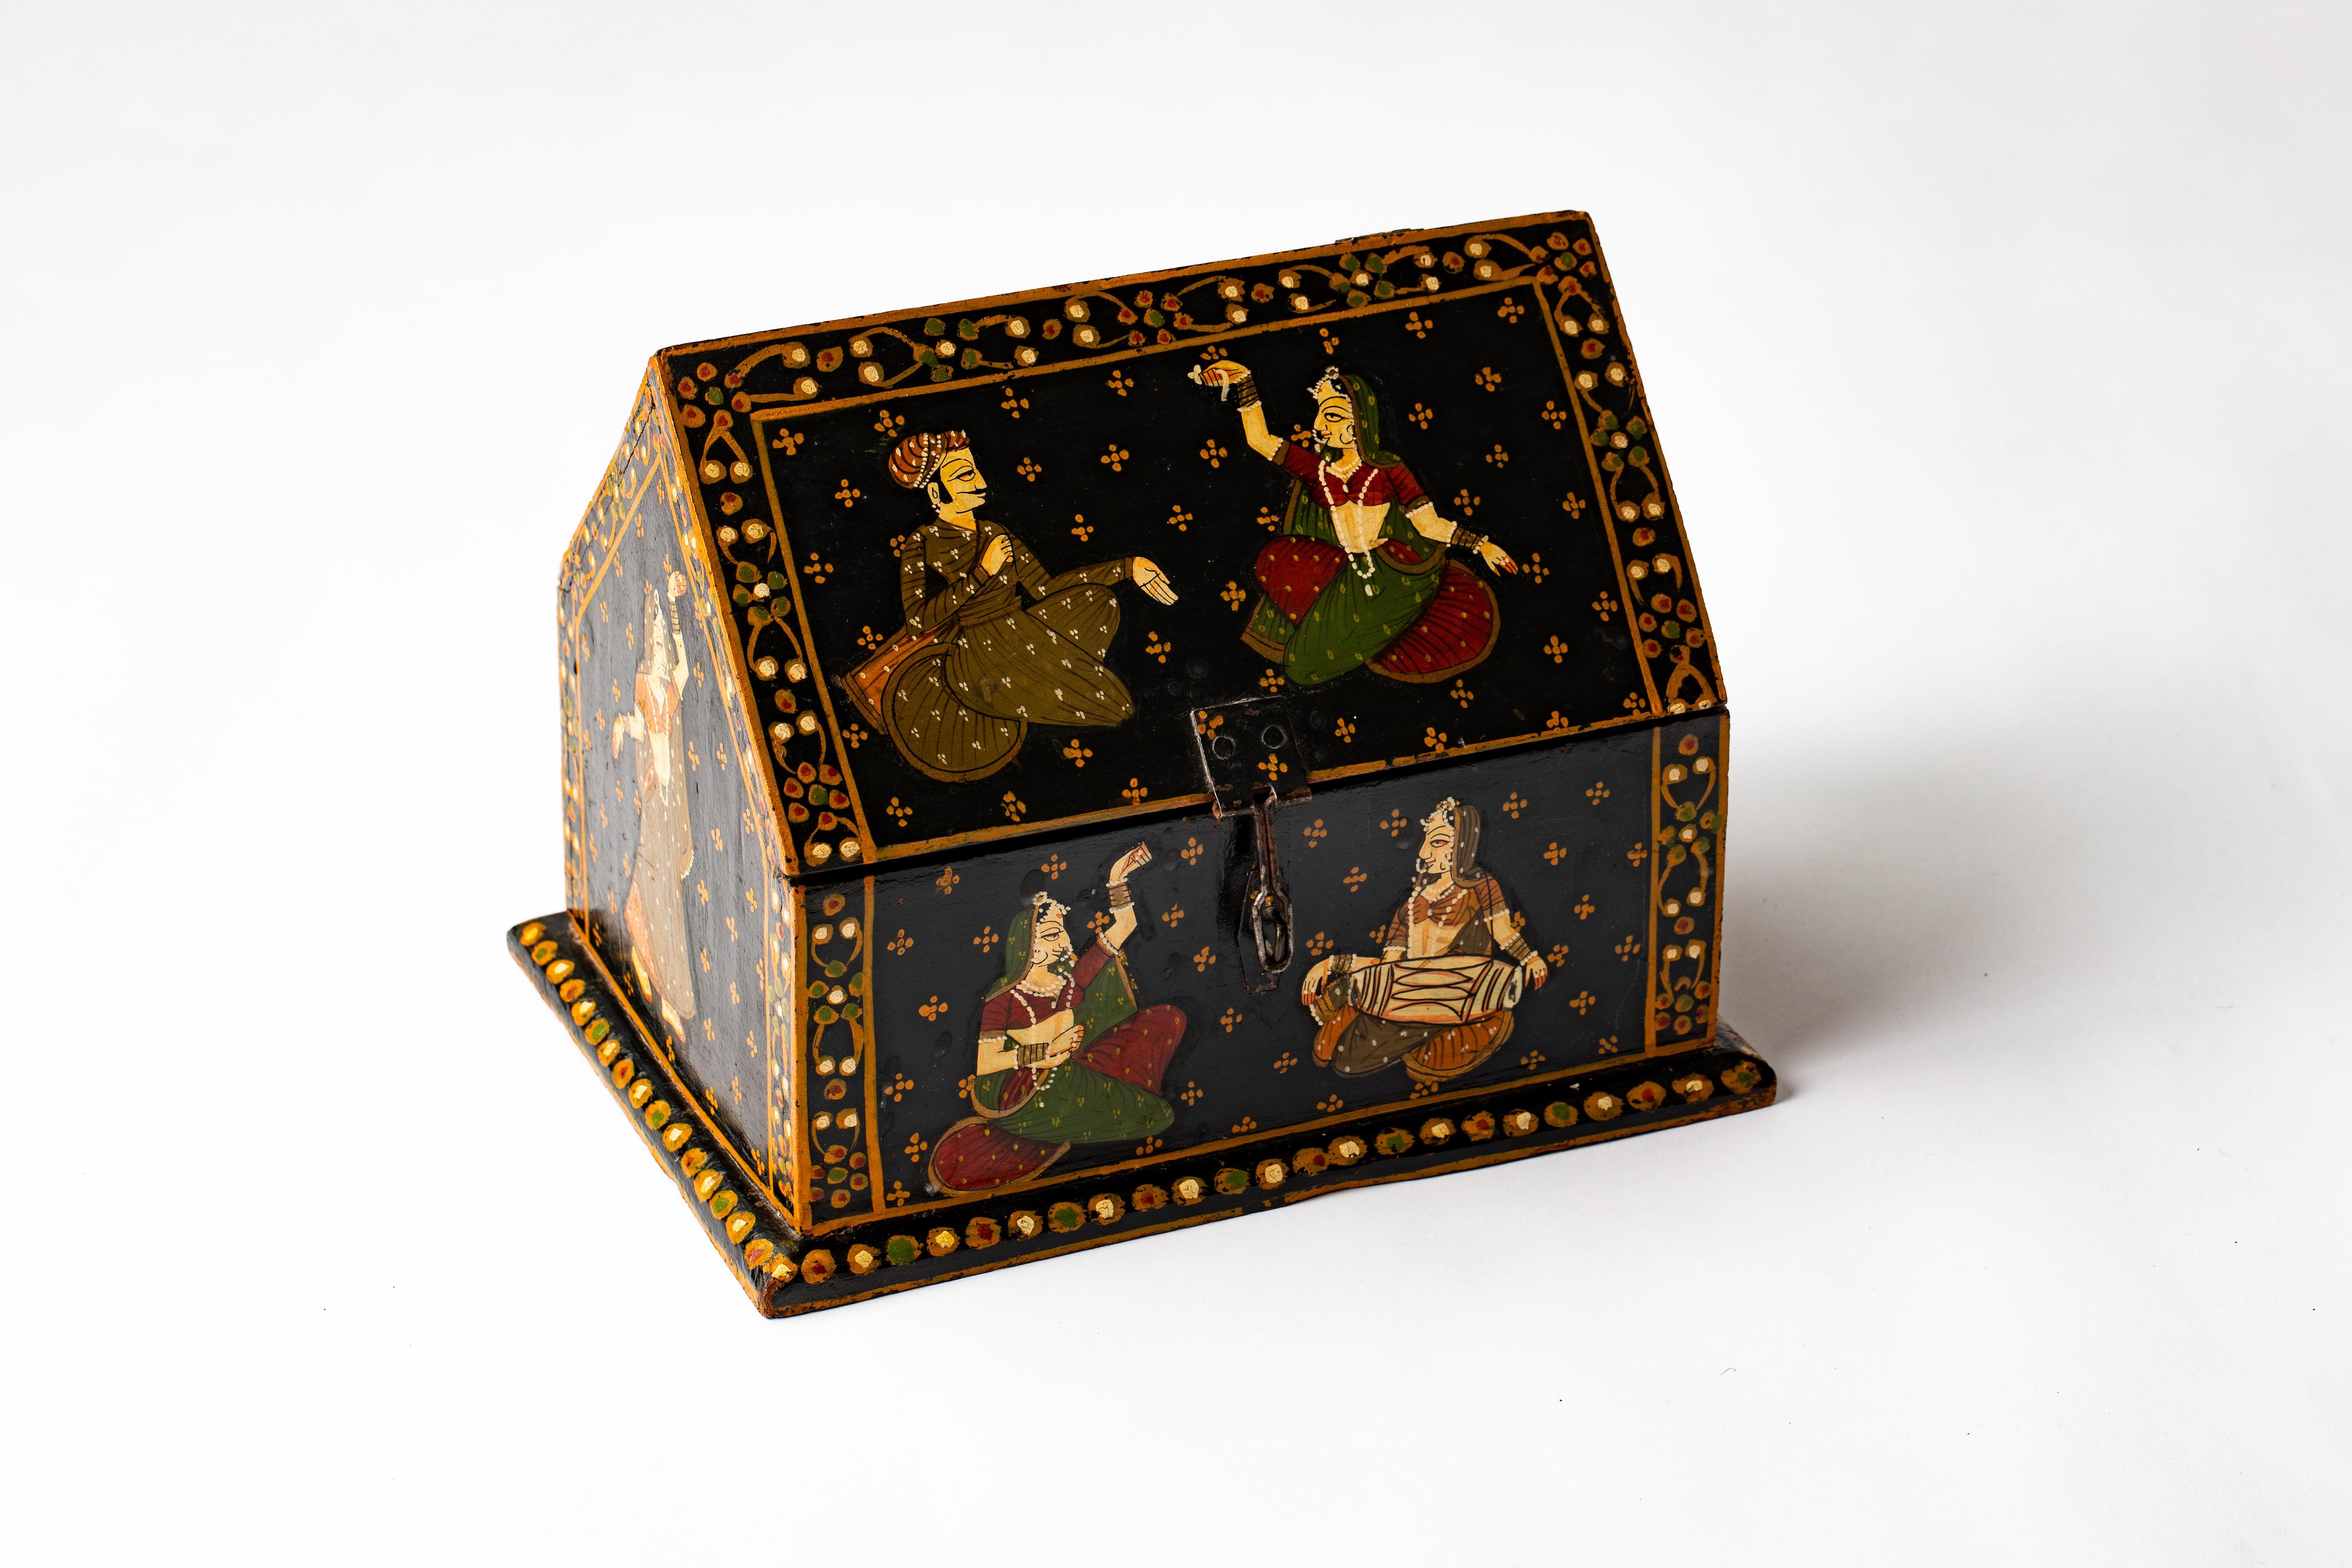 Vintage Rajasthani Indian vaulted dowry jewelry box, hand painted with Indian lovers enjoying each other, while beautiful court musicians accompany them musically, setting the tone for love. Wrought iron central hasp to open and close box. Red